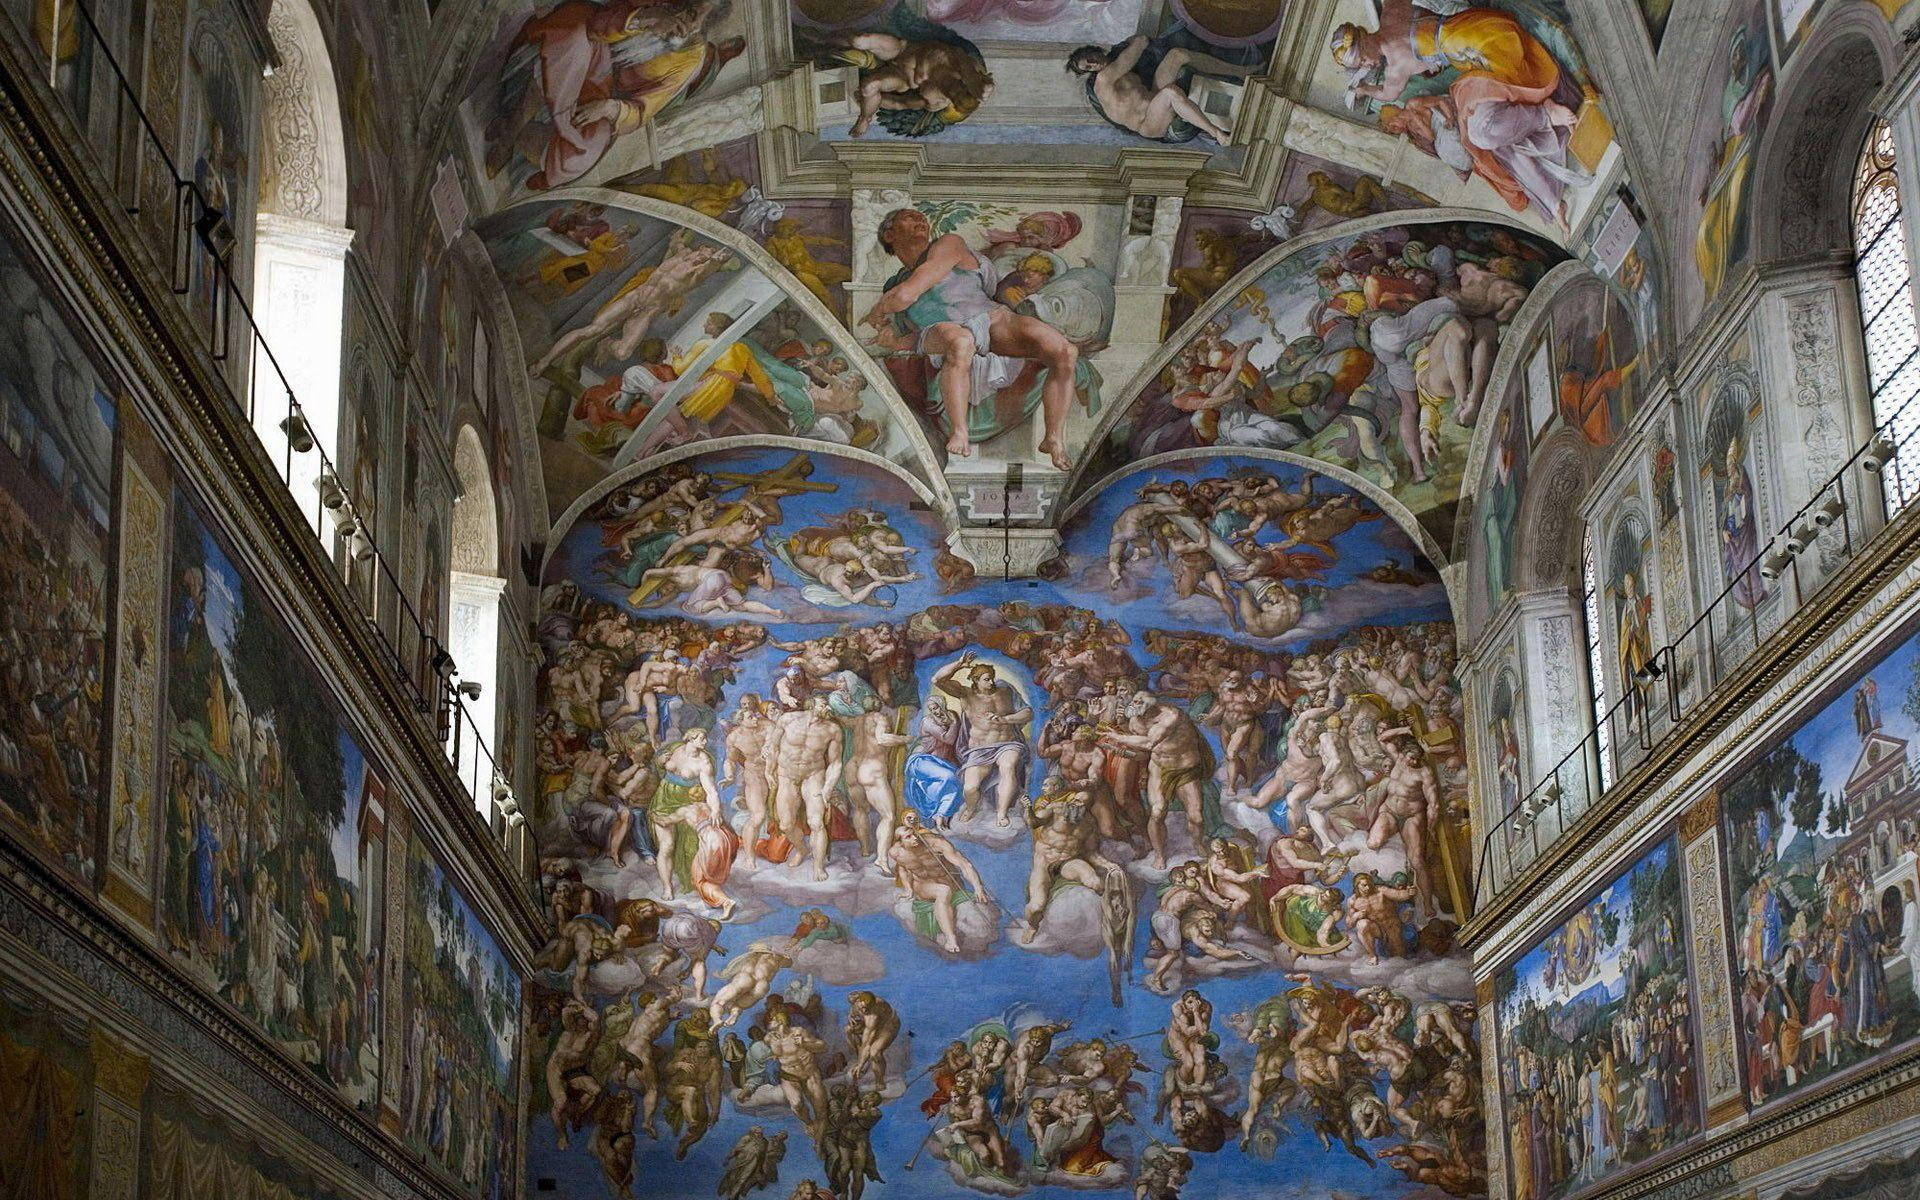 Caption: Divine Artistry - Ceiling of the Sistine Chapel Wallpaper